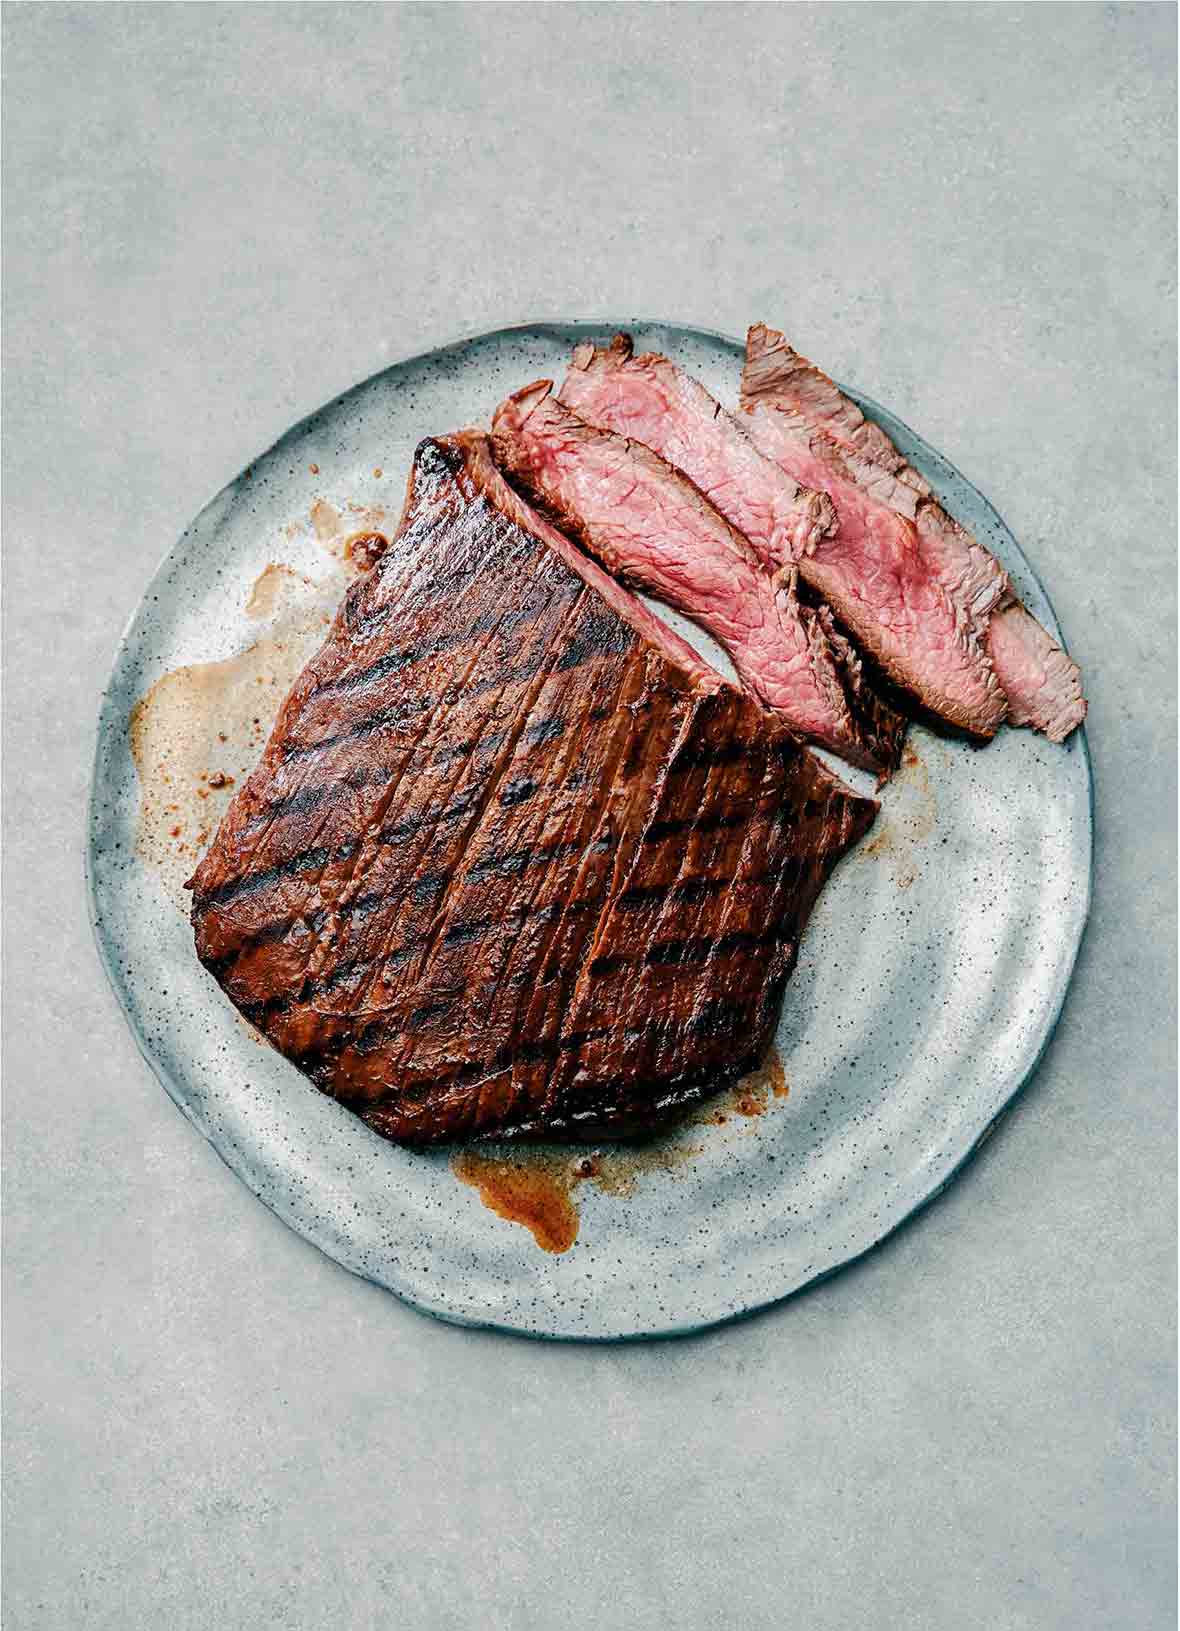 A piece of grilled flank steak on a plate with a few slices cut from it.